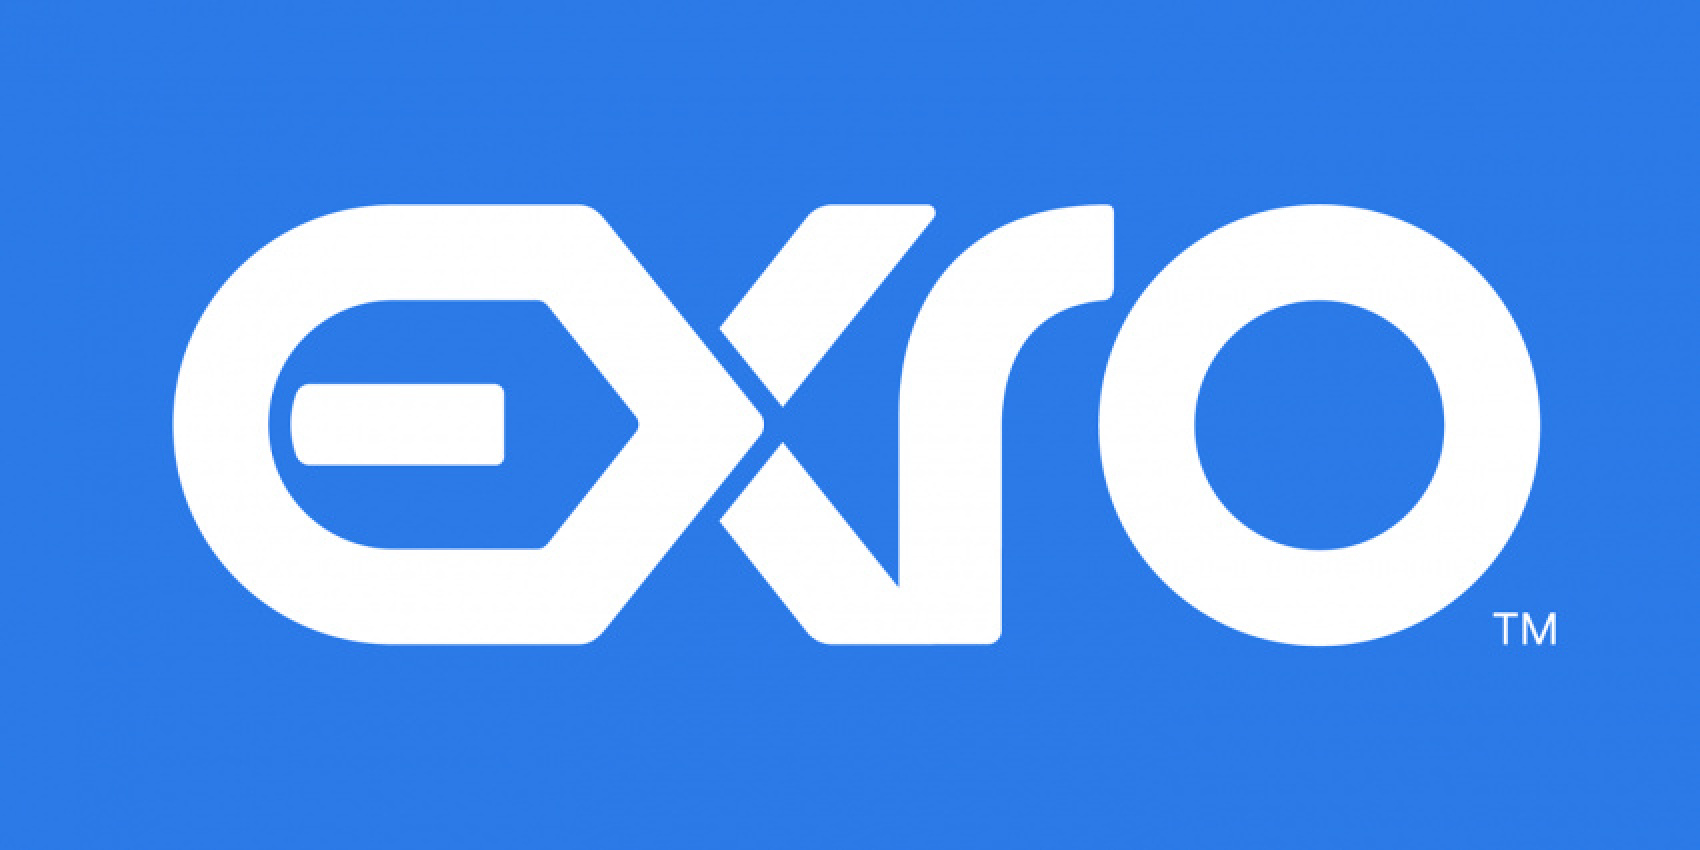 autos, cars, electric vehicle, utility vehicles, canada, coil drive system, electric buses, exro technologies, vicinity, vicinity purchases 2,500 coil drivers from exro